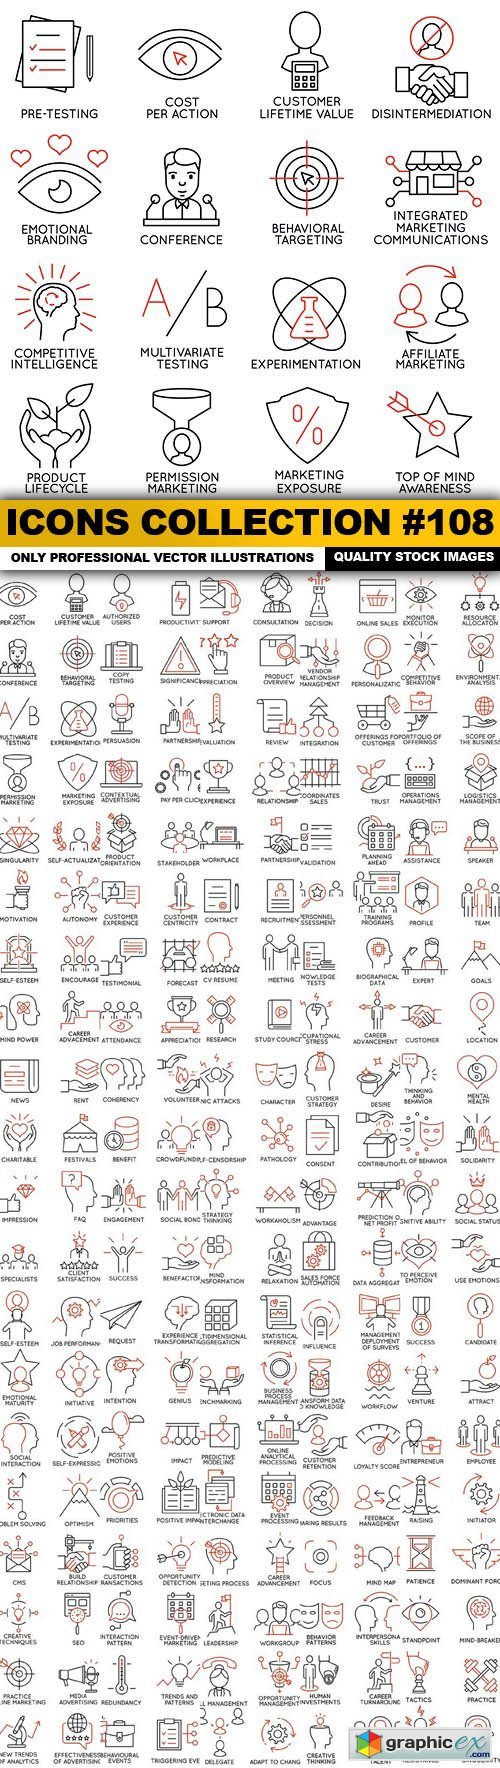 Icons Collection #108 - 25 Vector